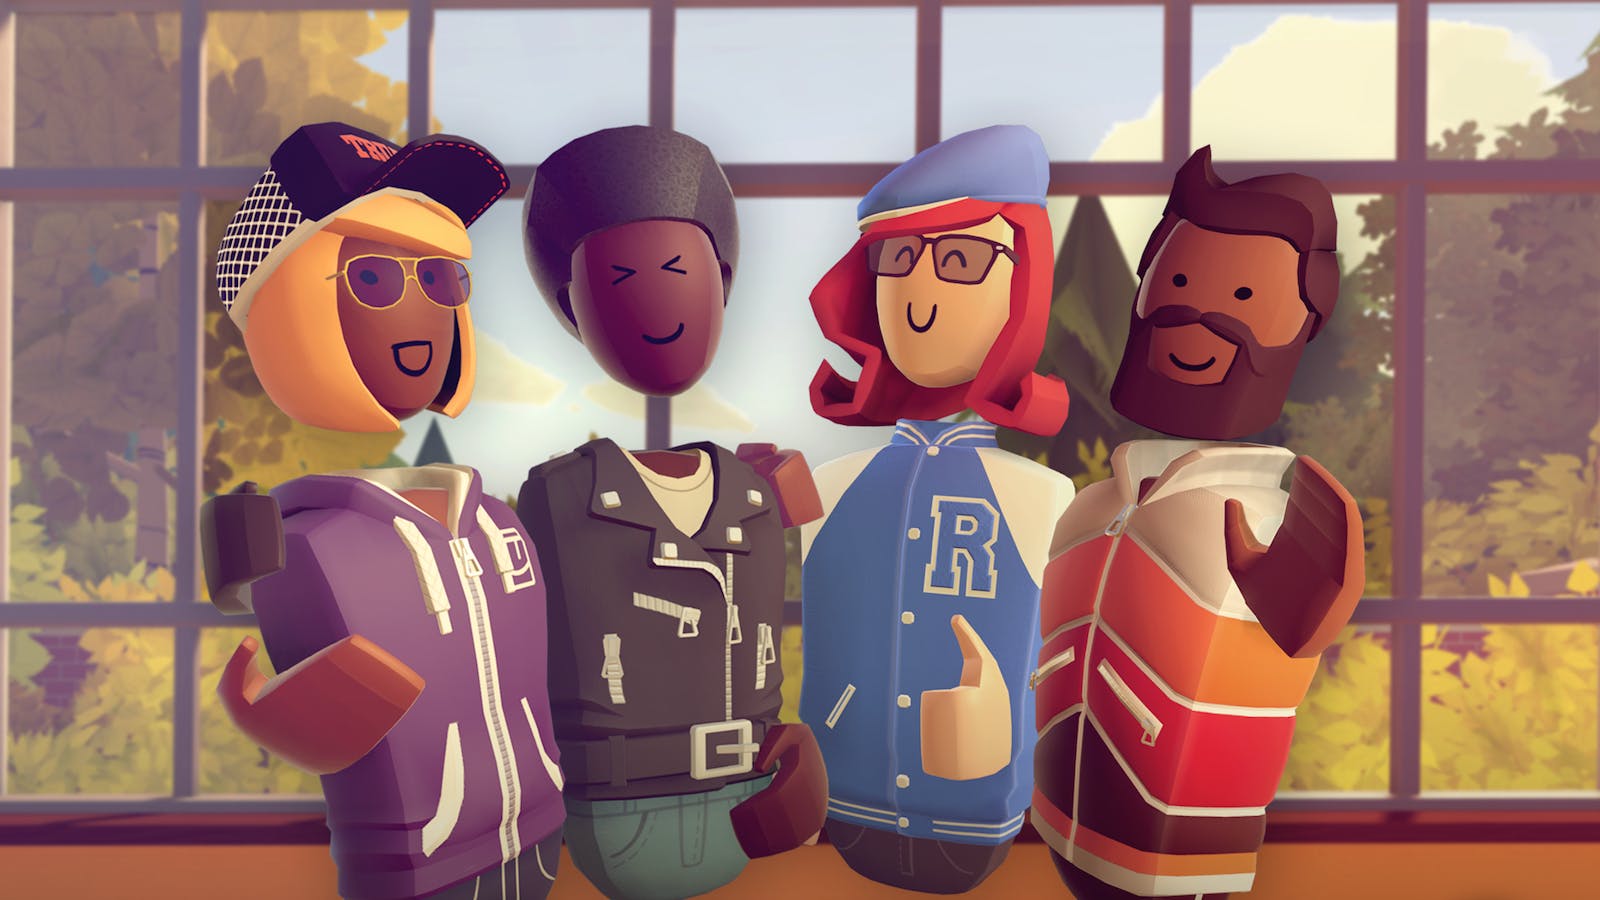 A group of four Rec Room avatars gathered together. Credit: Rec Room